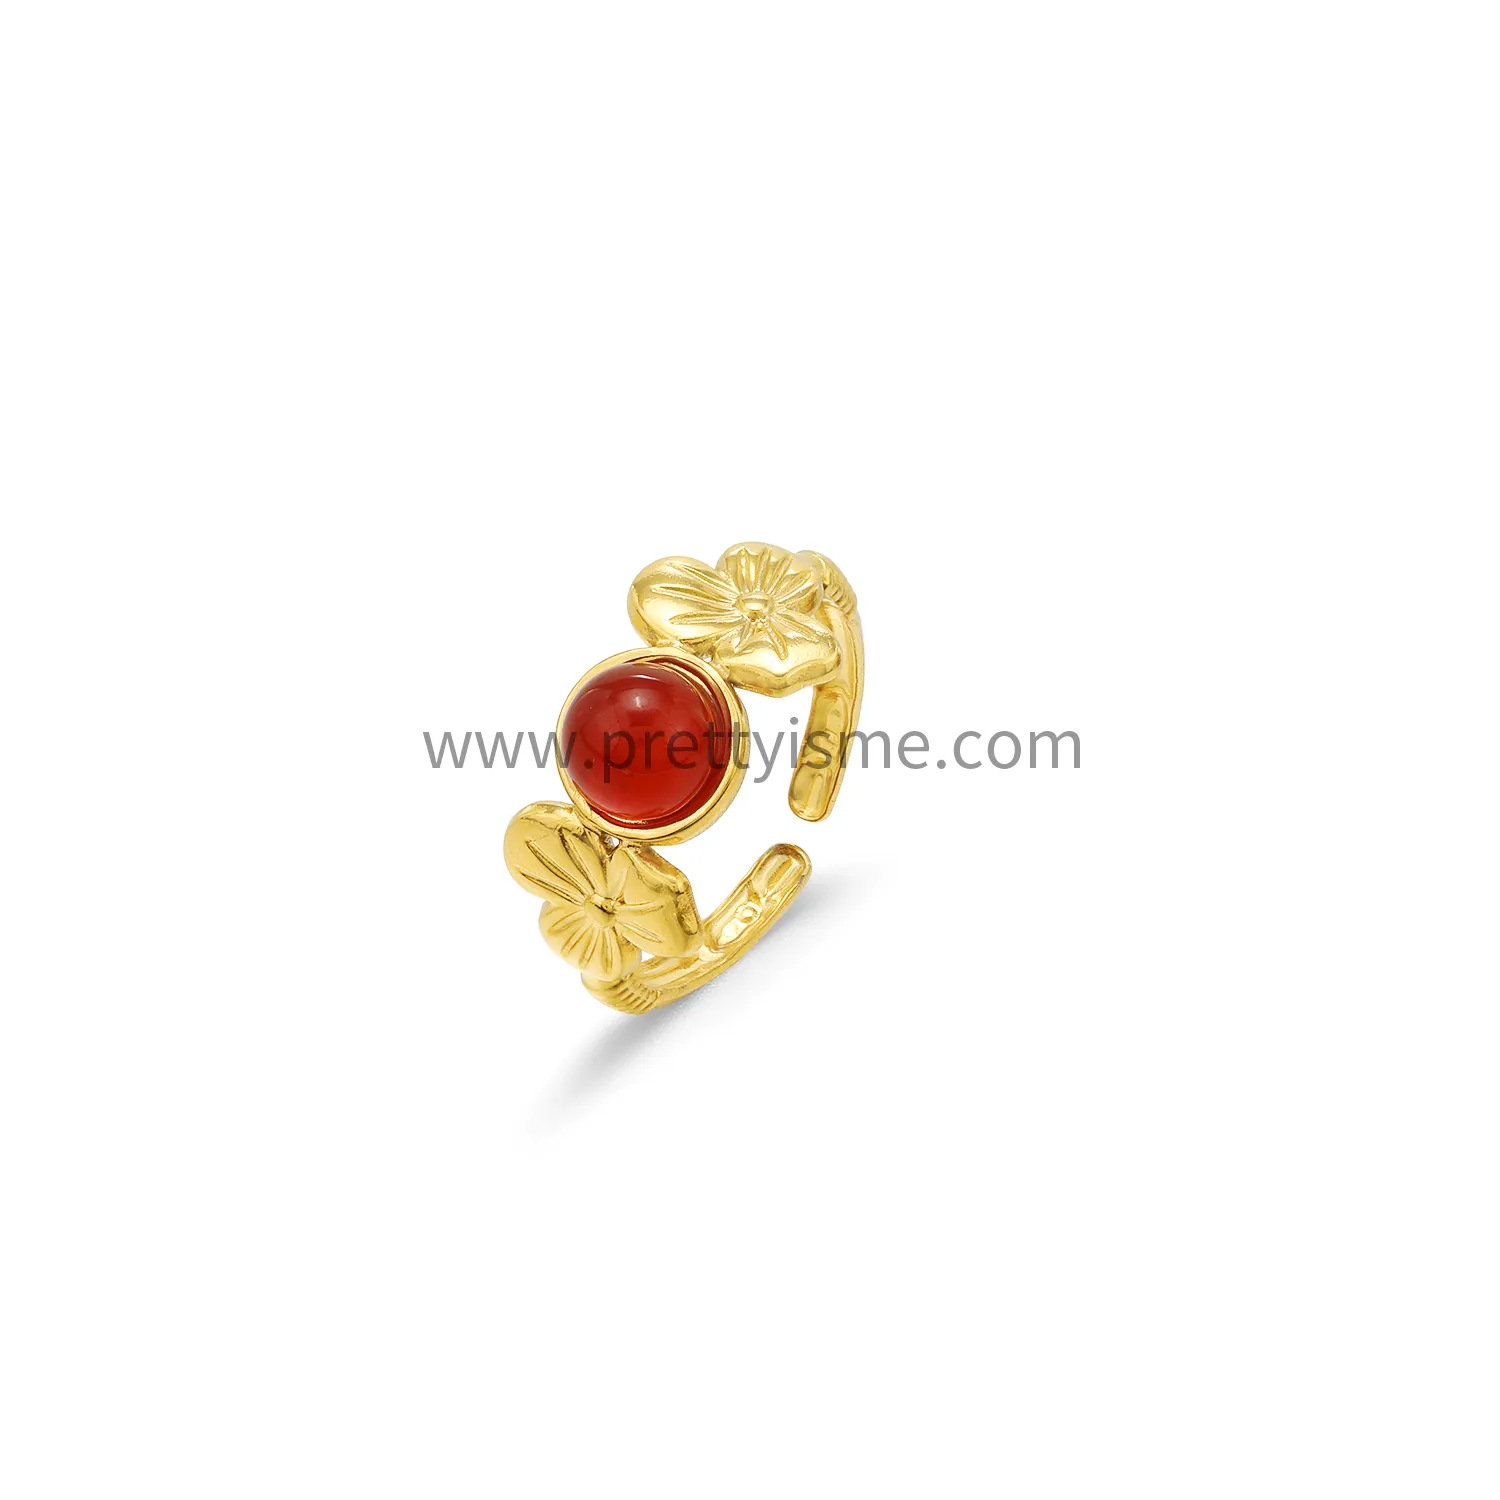 Delicate French Style Stainless Steel Open Ring Set with Charming Red Gemstone Thin Ring (5).webp